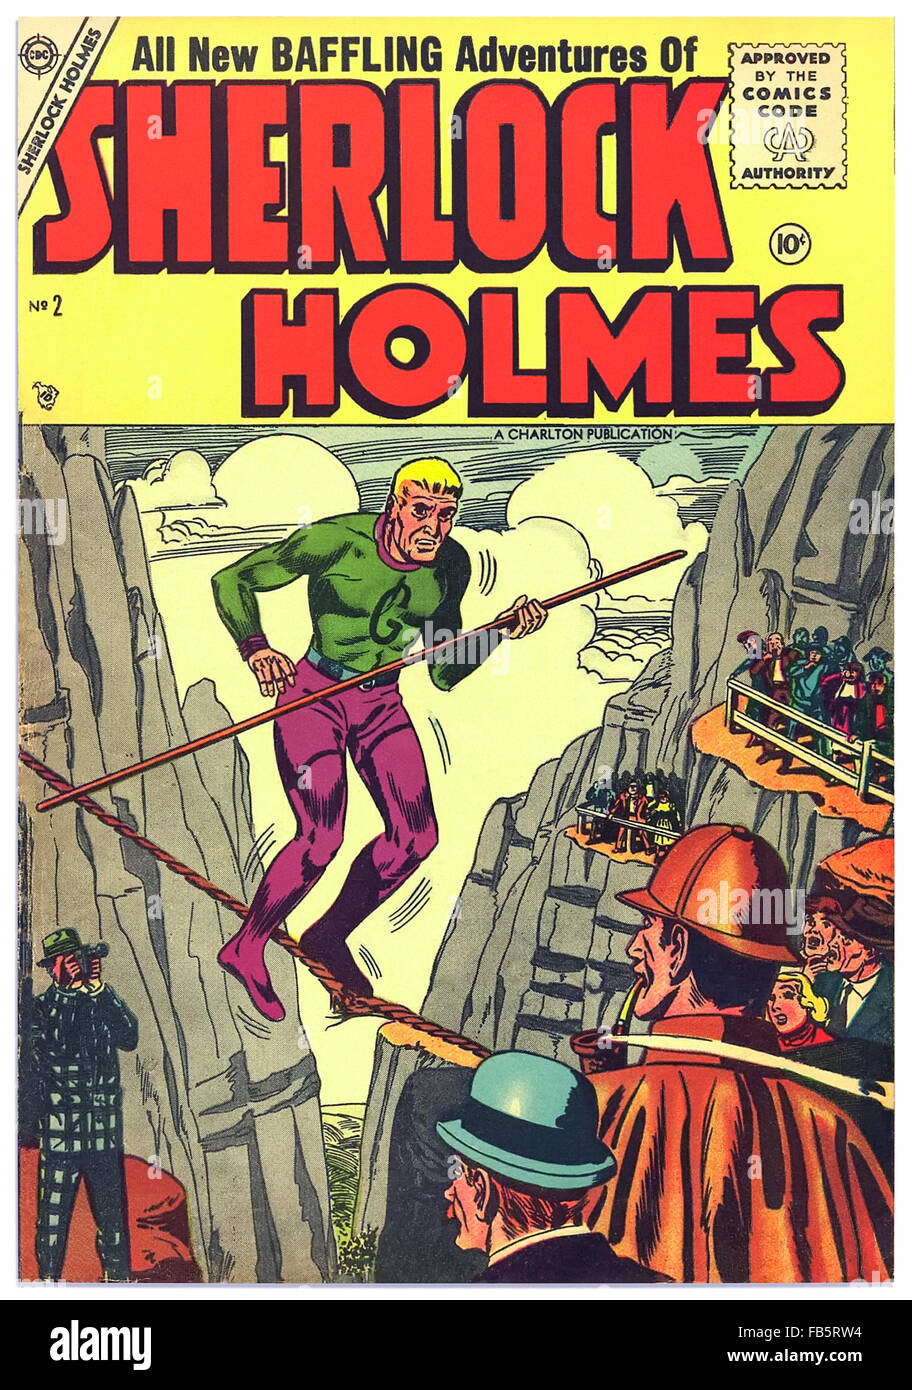 'All New Baffling Adventures of Sherlock Holmes' Charlton Comics 1955, comic book adaptation where Sherlock is relocated to New York City. Only 2 issues were ever produced (see FB42KP for issue 1). Stock Photo